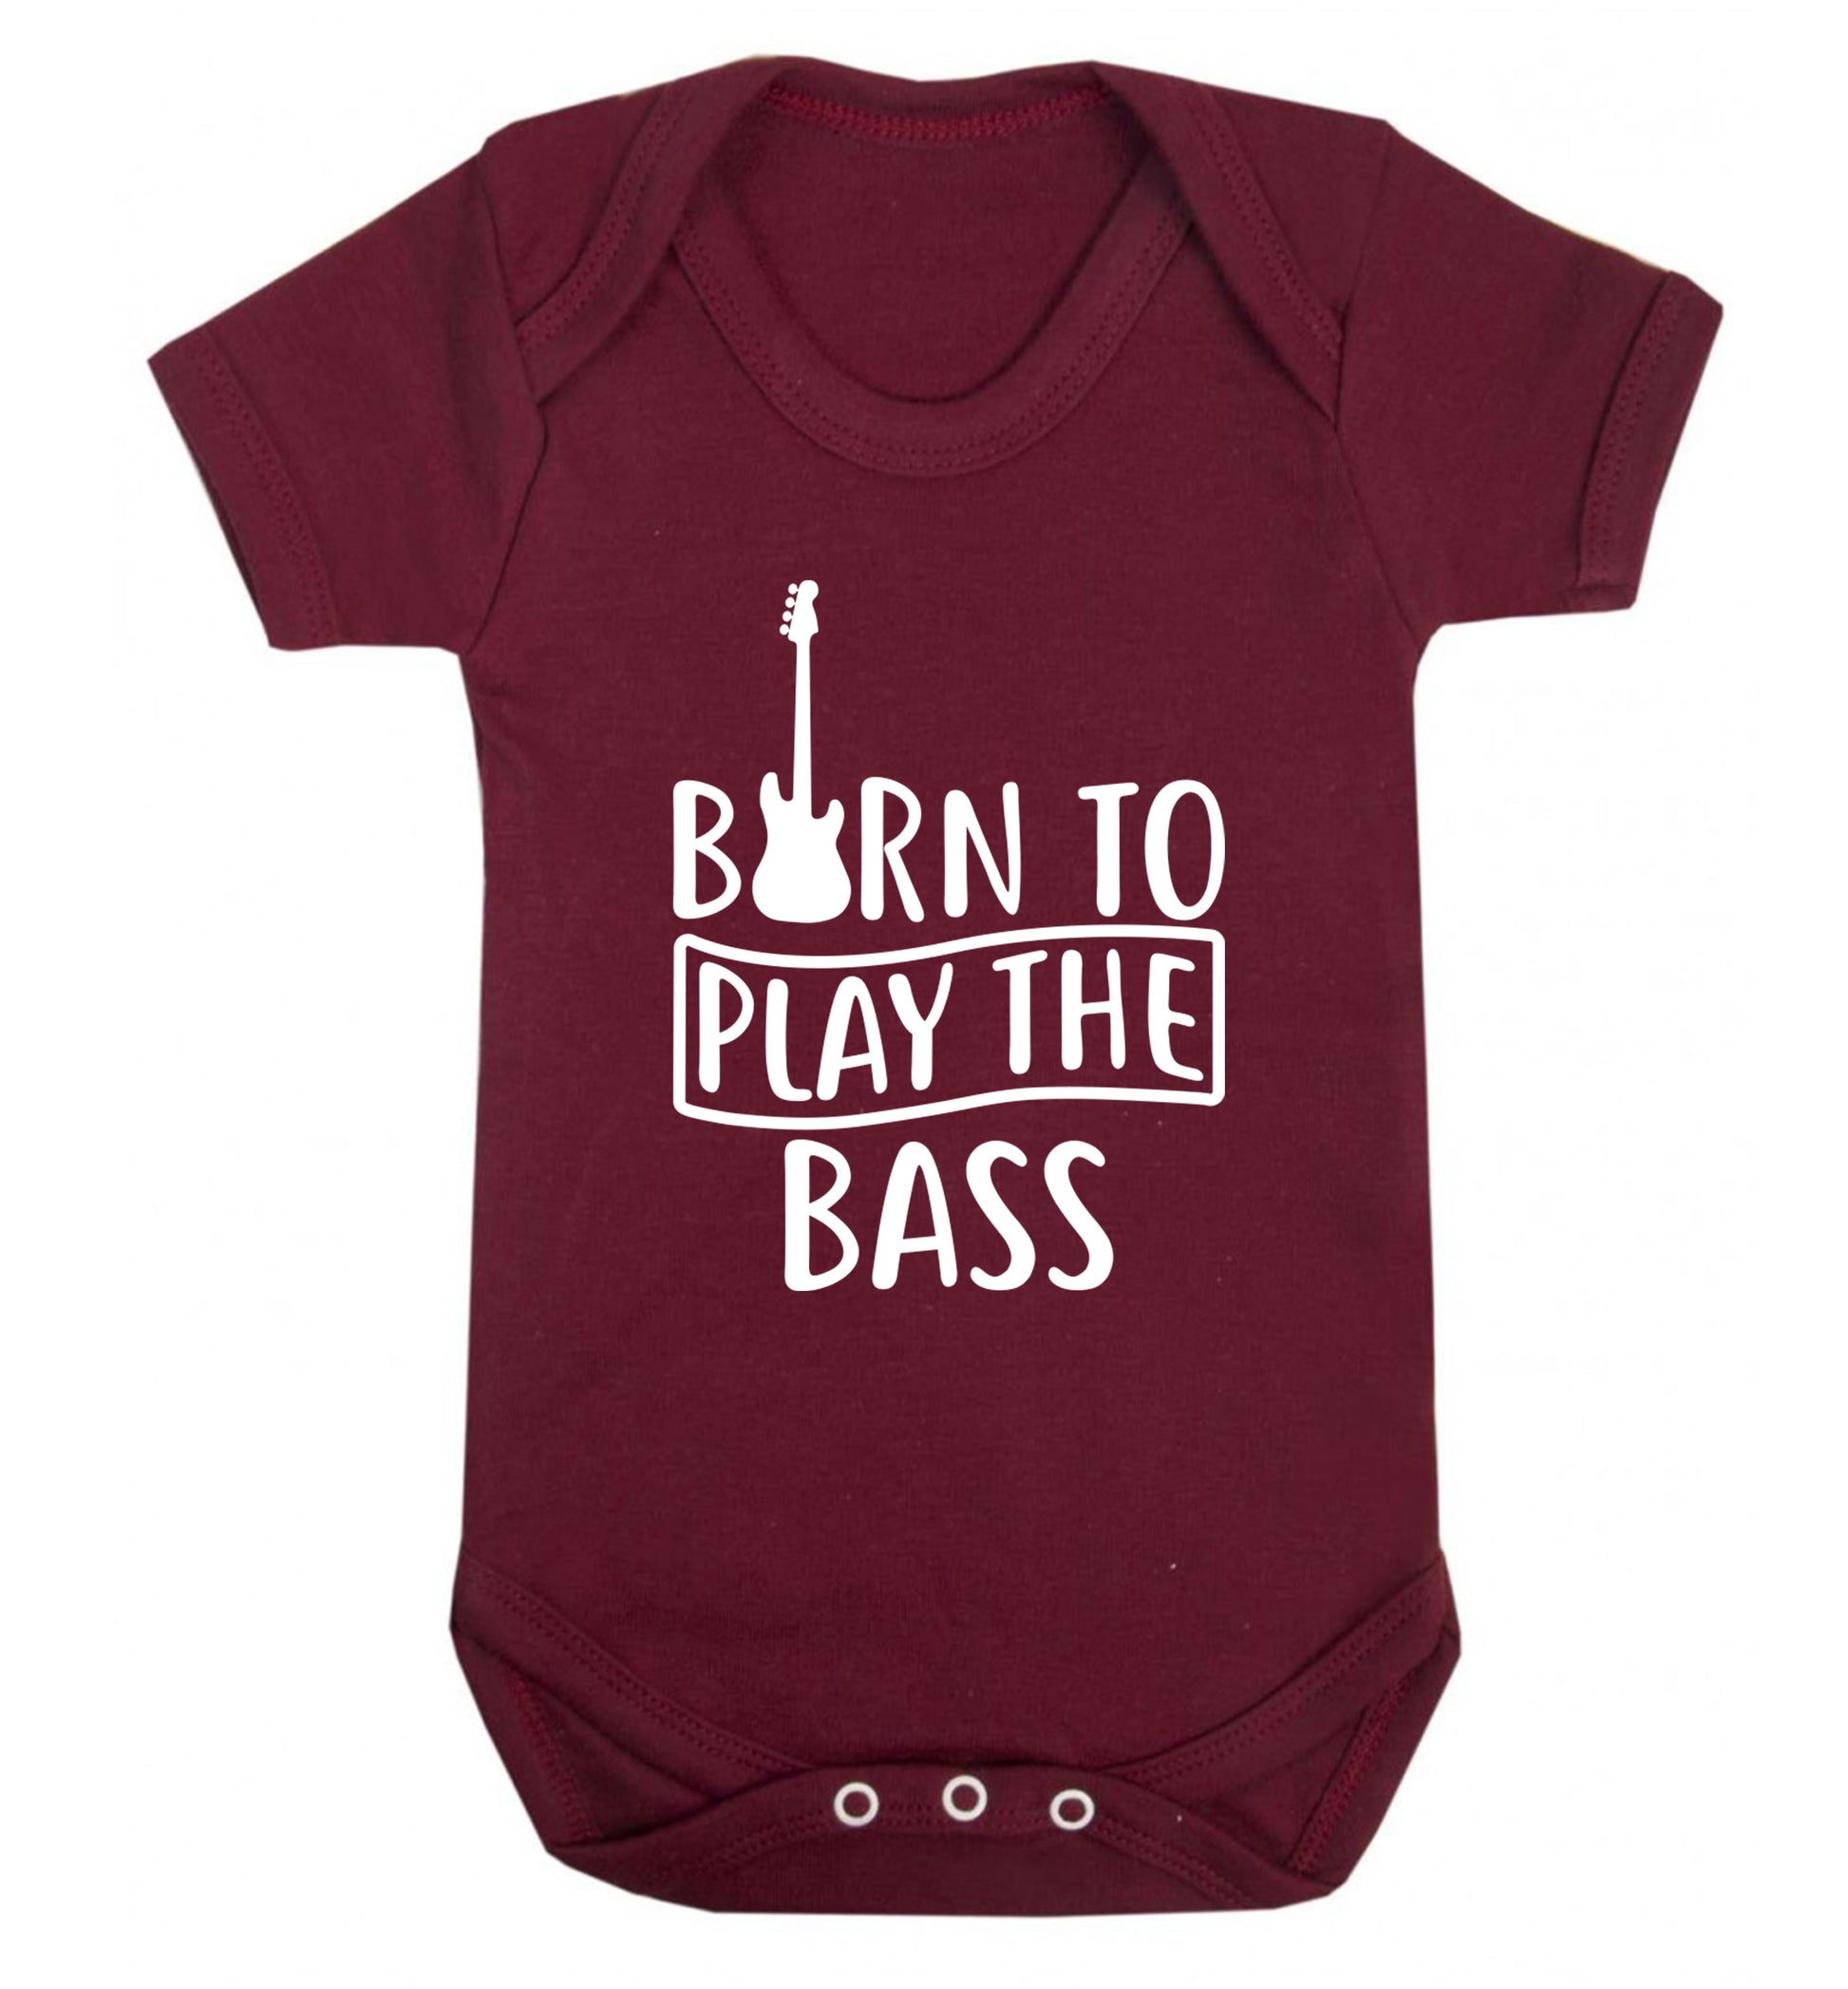 Born to play the bass Baby Vest maroon 18-24 months